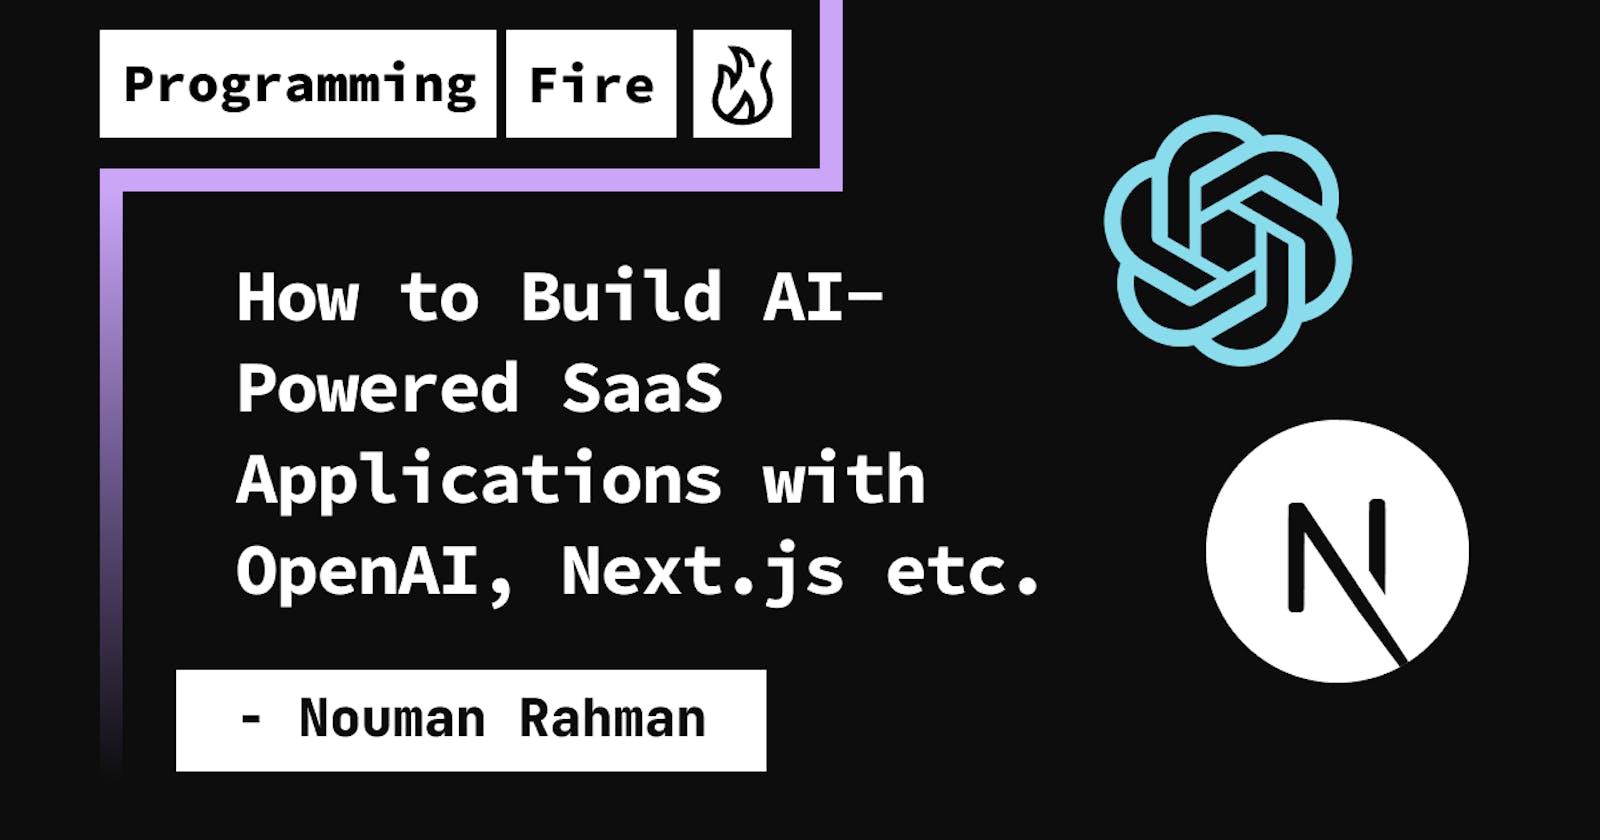 How to Build AI-Powered SaaS Applications with OpenAI, Next.js etc.